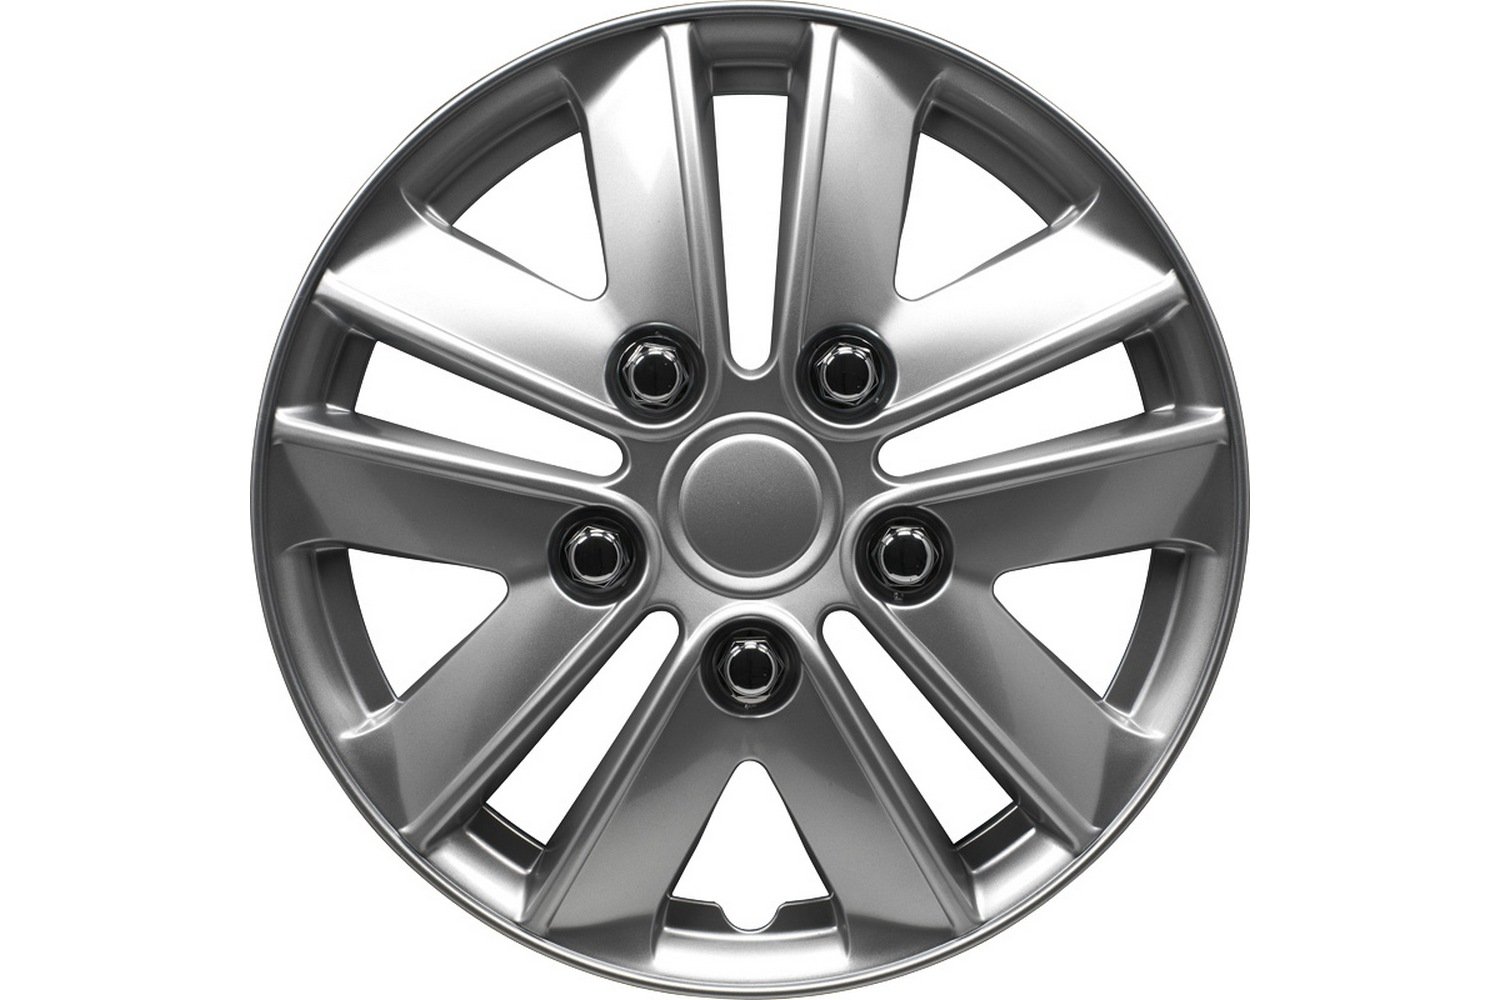 Wheel covers Kentucky 14 inch set 4 pieces